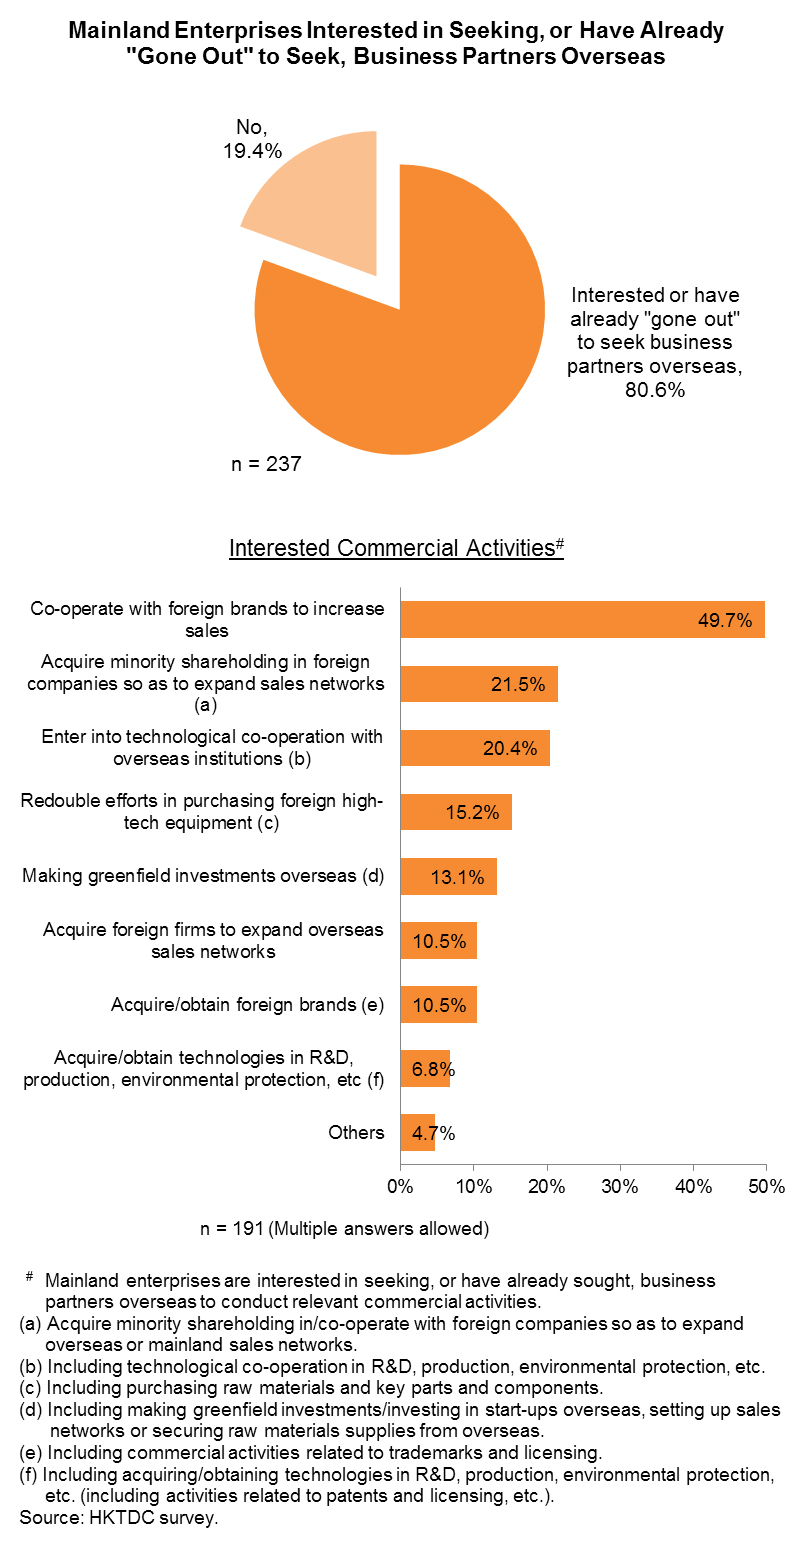 Chart: Mainland Enterprises Interested in Seeking, or Have Already “Gone Out” to Seek, Business